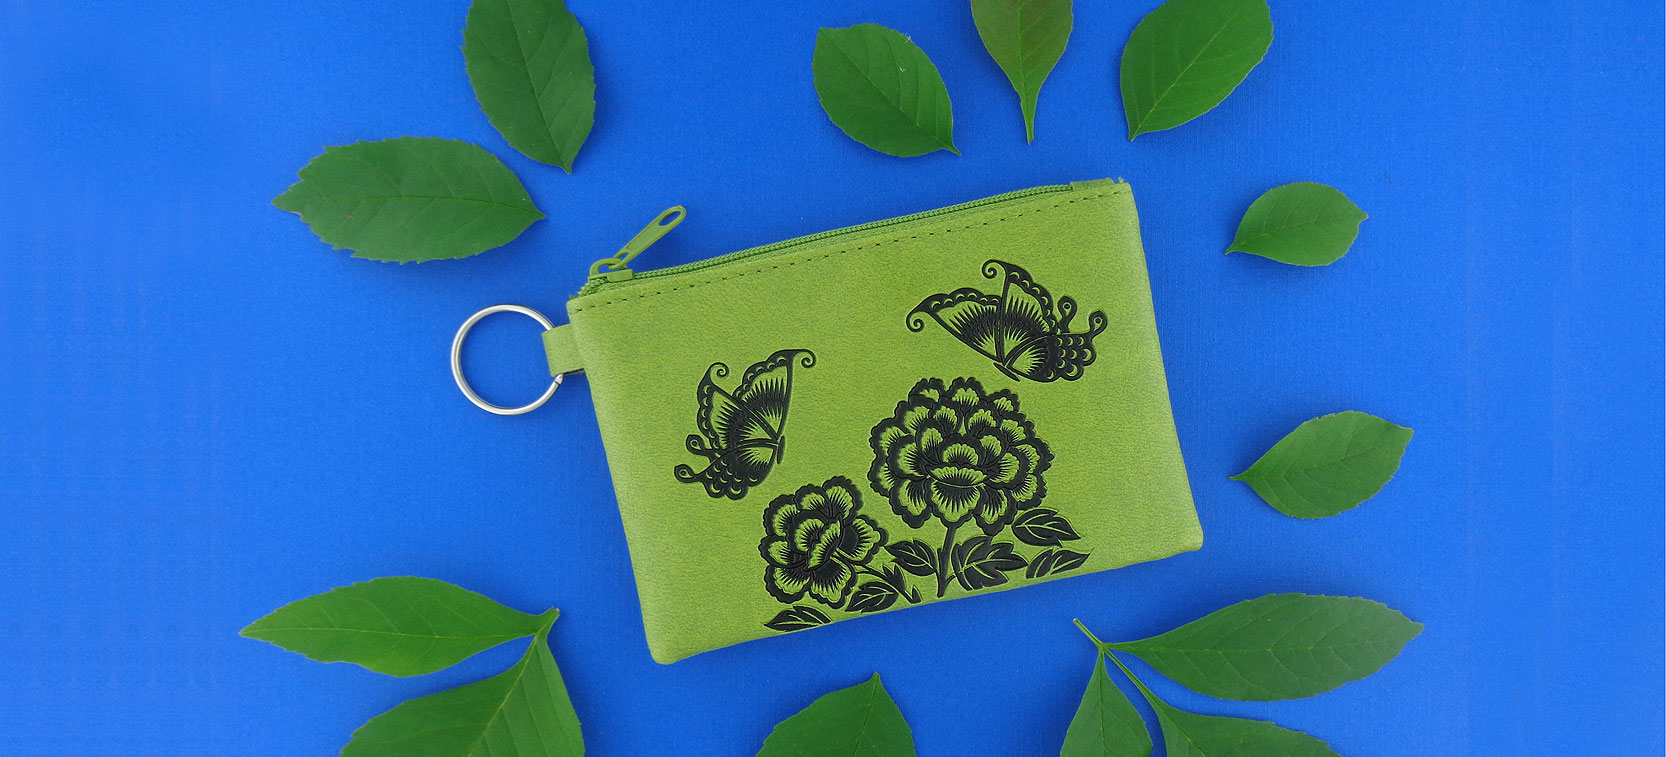 LAVISHY design and wholesale vegan coin purses to gift shops, boutiques and book stores in Canada, USA and worldwide.